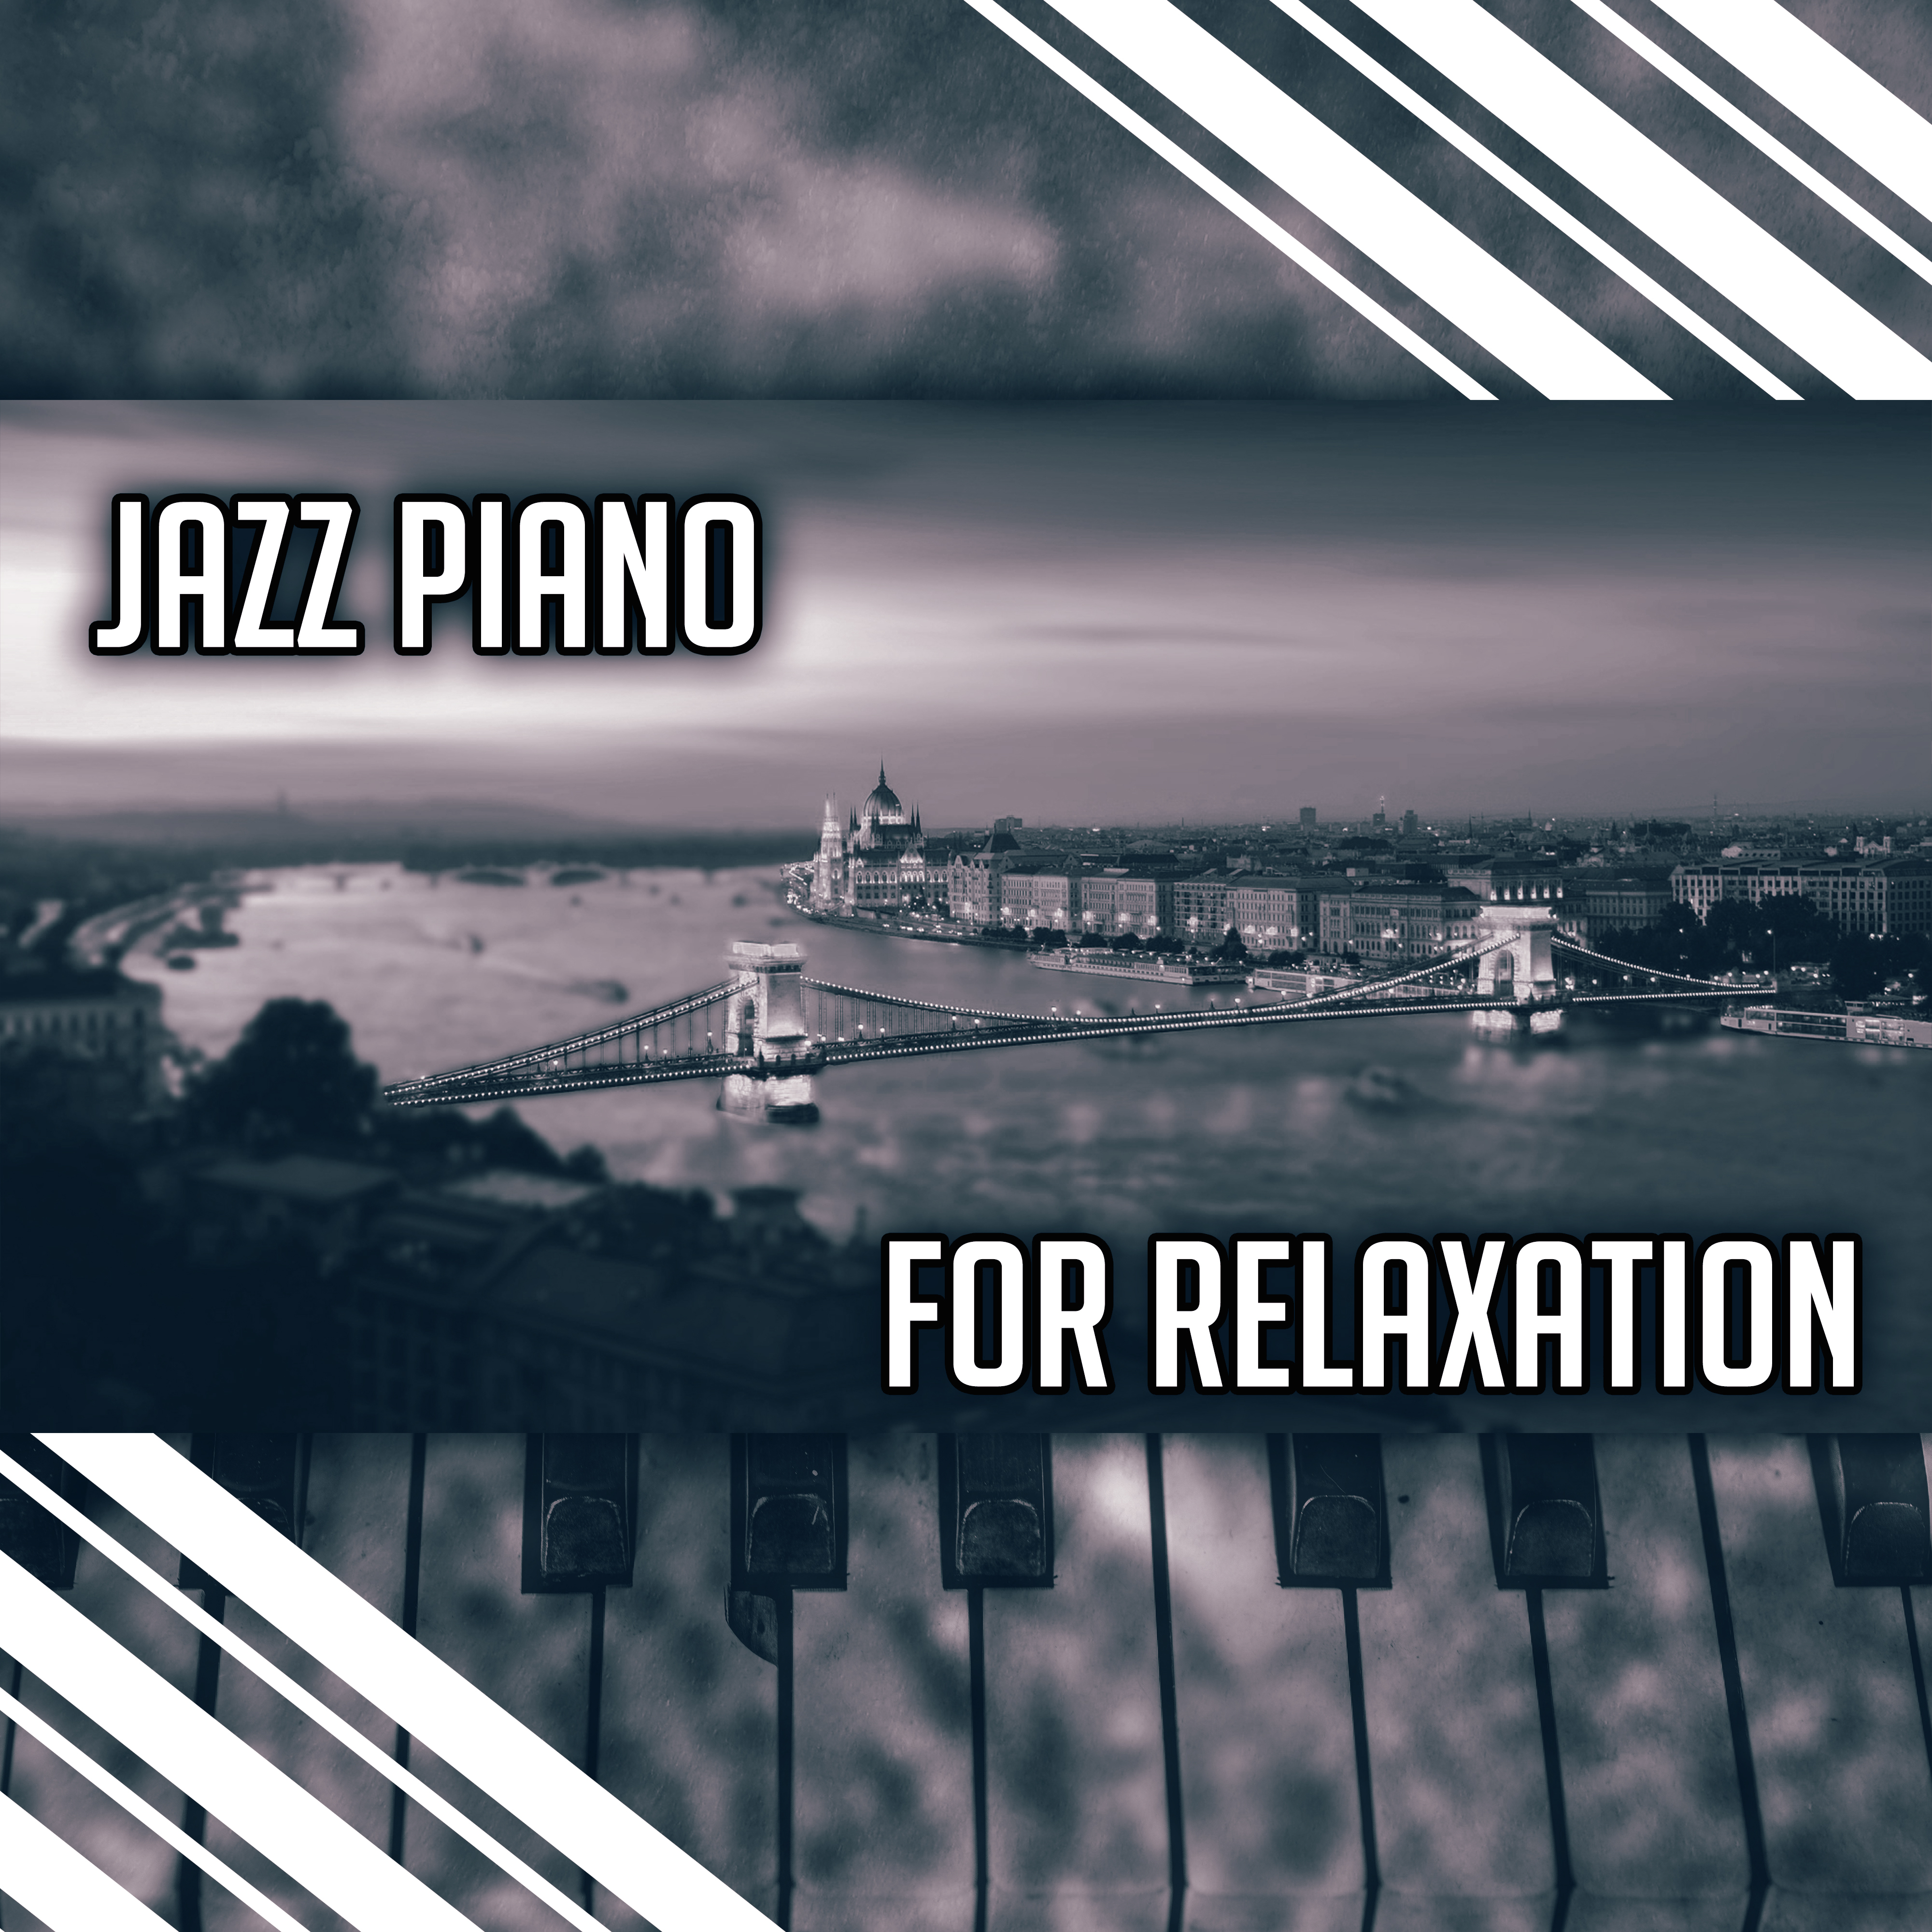 Jazz Piano for Relaxation – Smooth Night Jazz, Piano Bar to Rest, Night Music, Moonlight Note